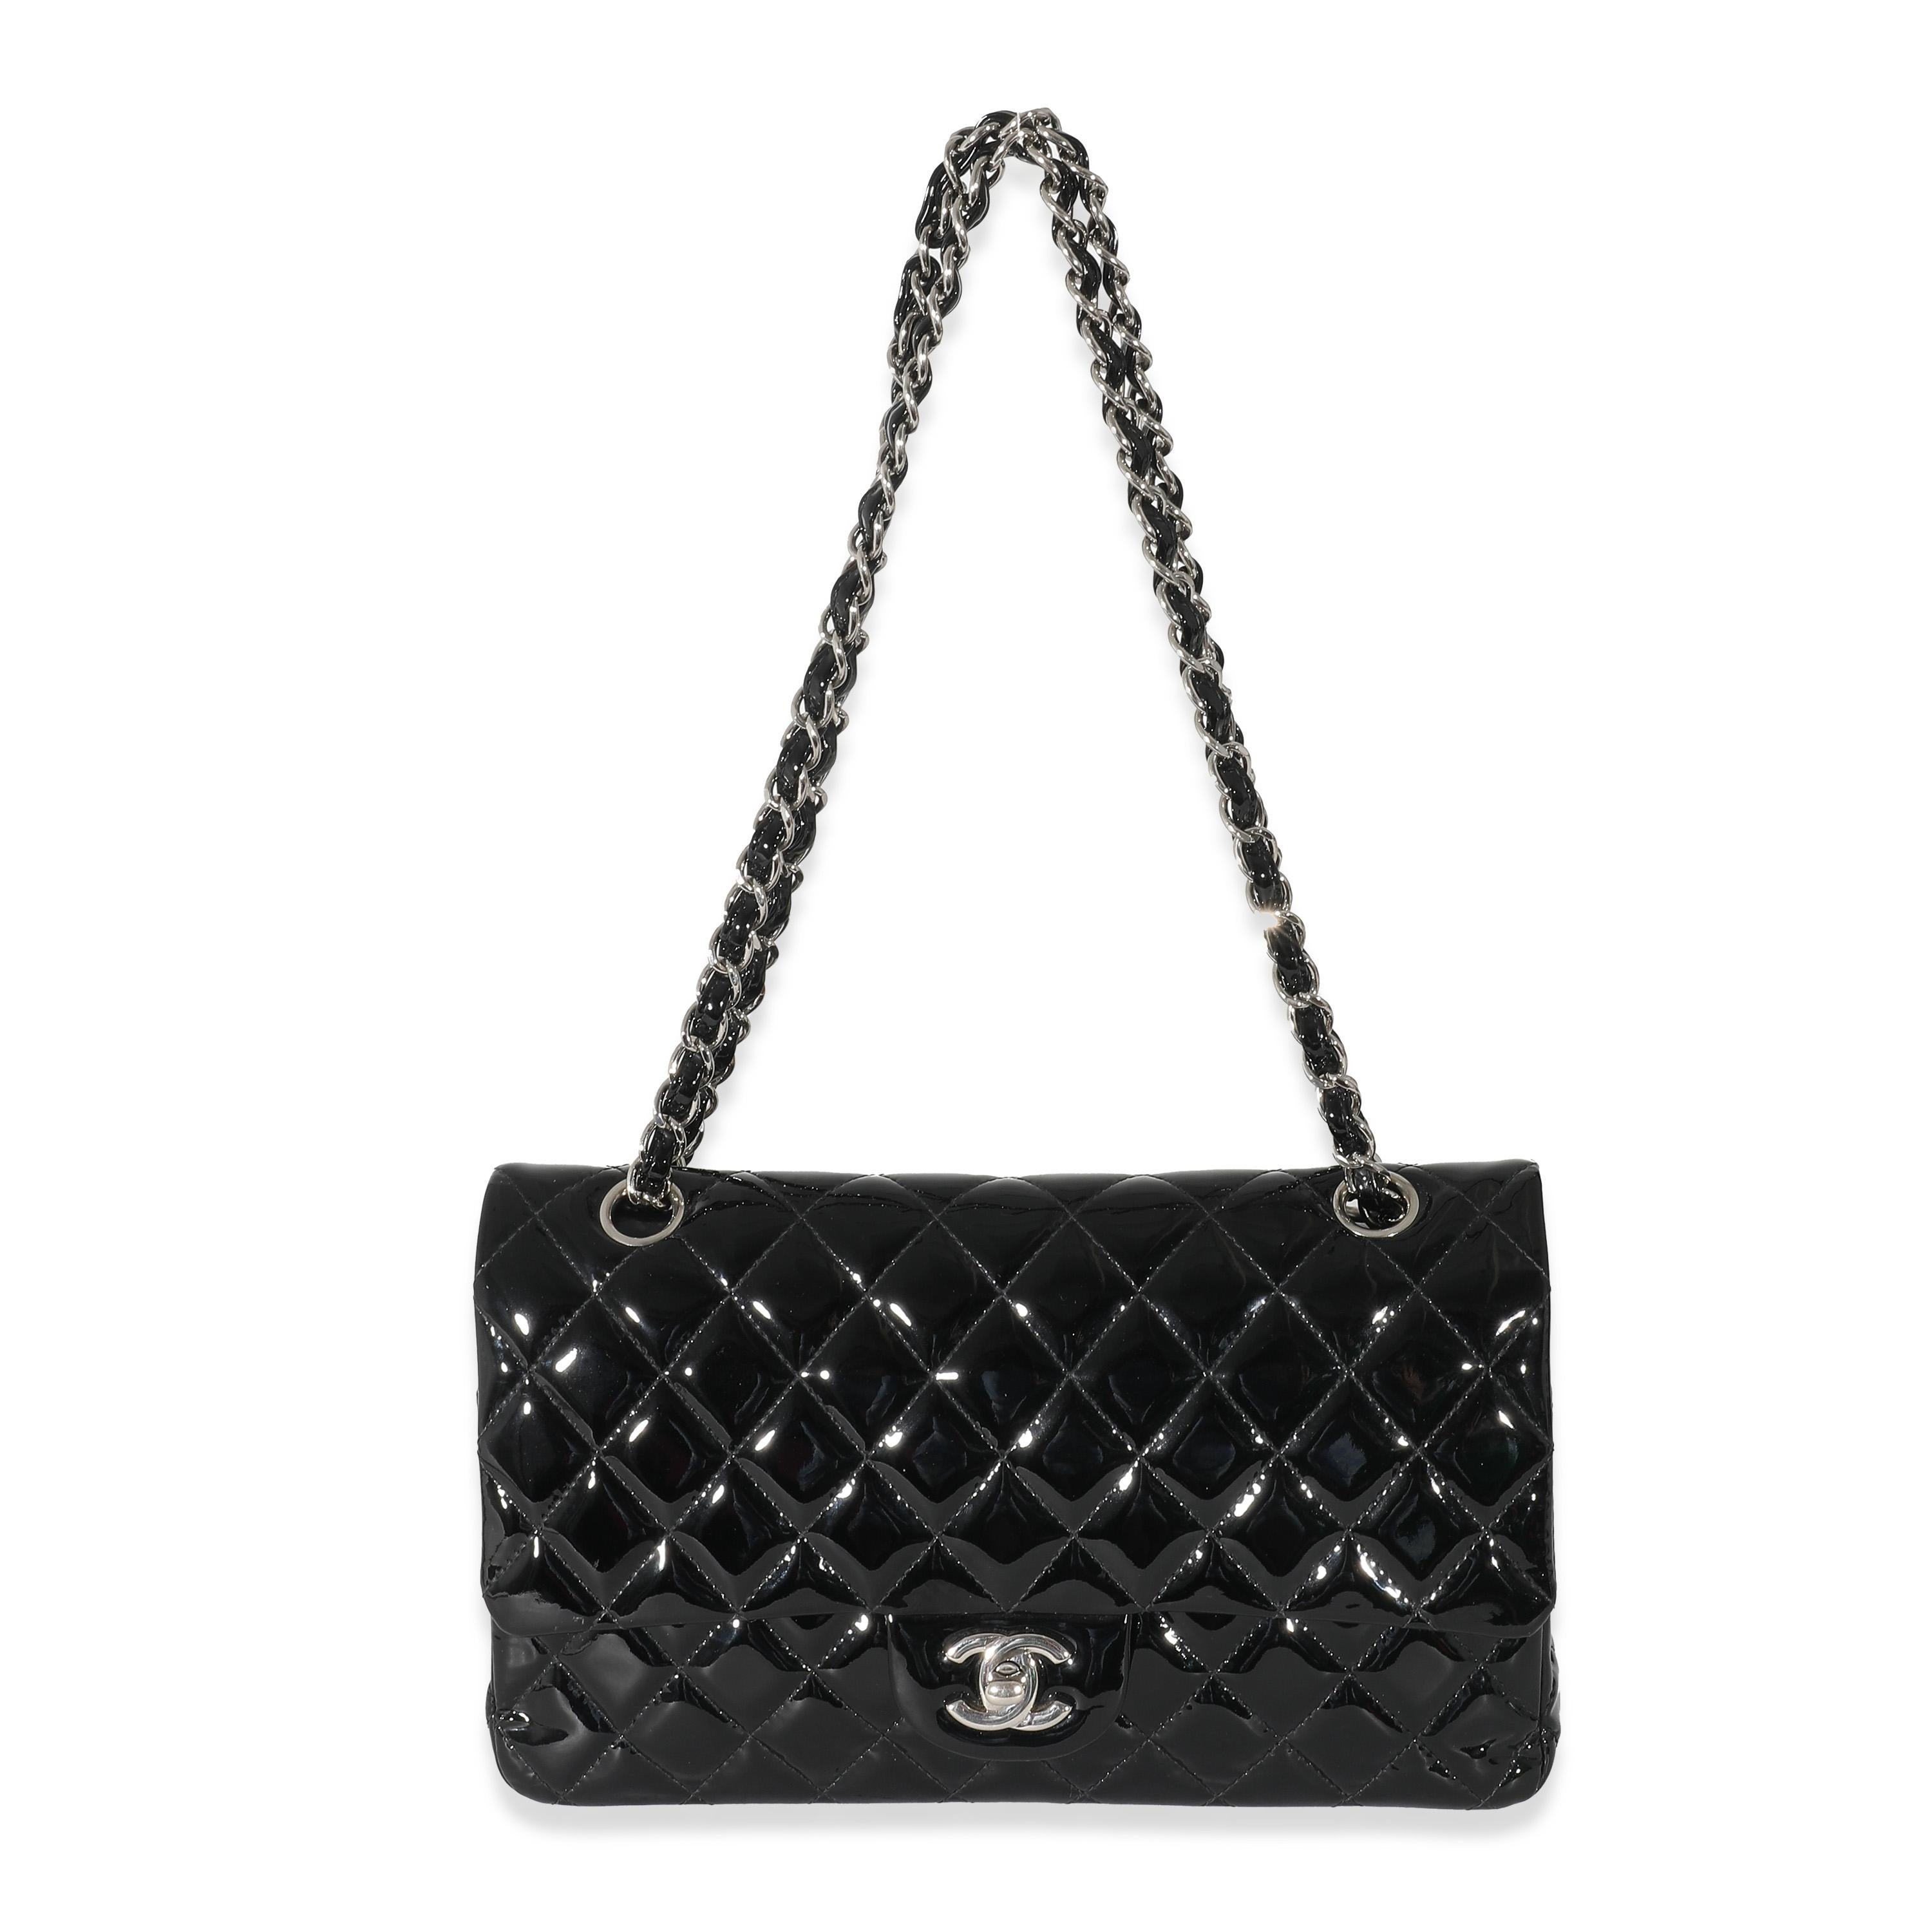 Listing Title: Chanel Black Patent Medium Classic Double Flap Bag
SKU: 133982
Condition: Pre-owned 
Handbag Condition: Very Good
Condition Comments: Item is in very good condition with minor signs of wear. Exterior light scuffing and marks.